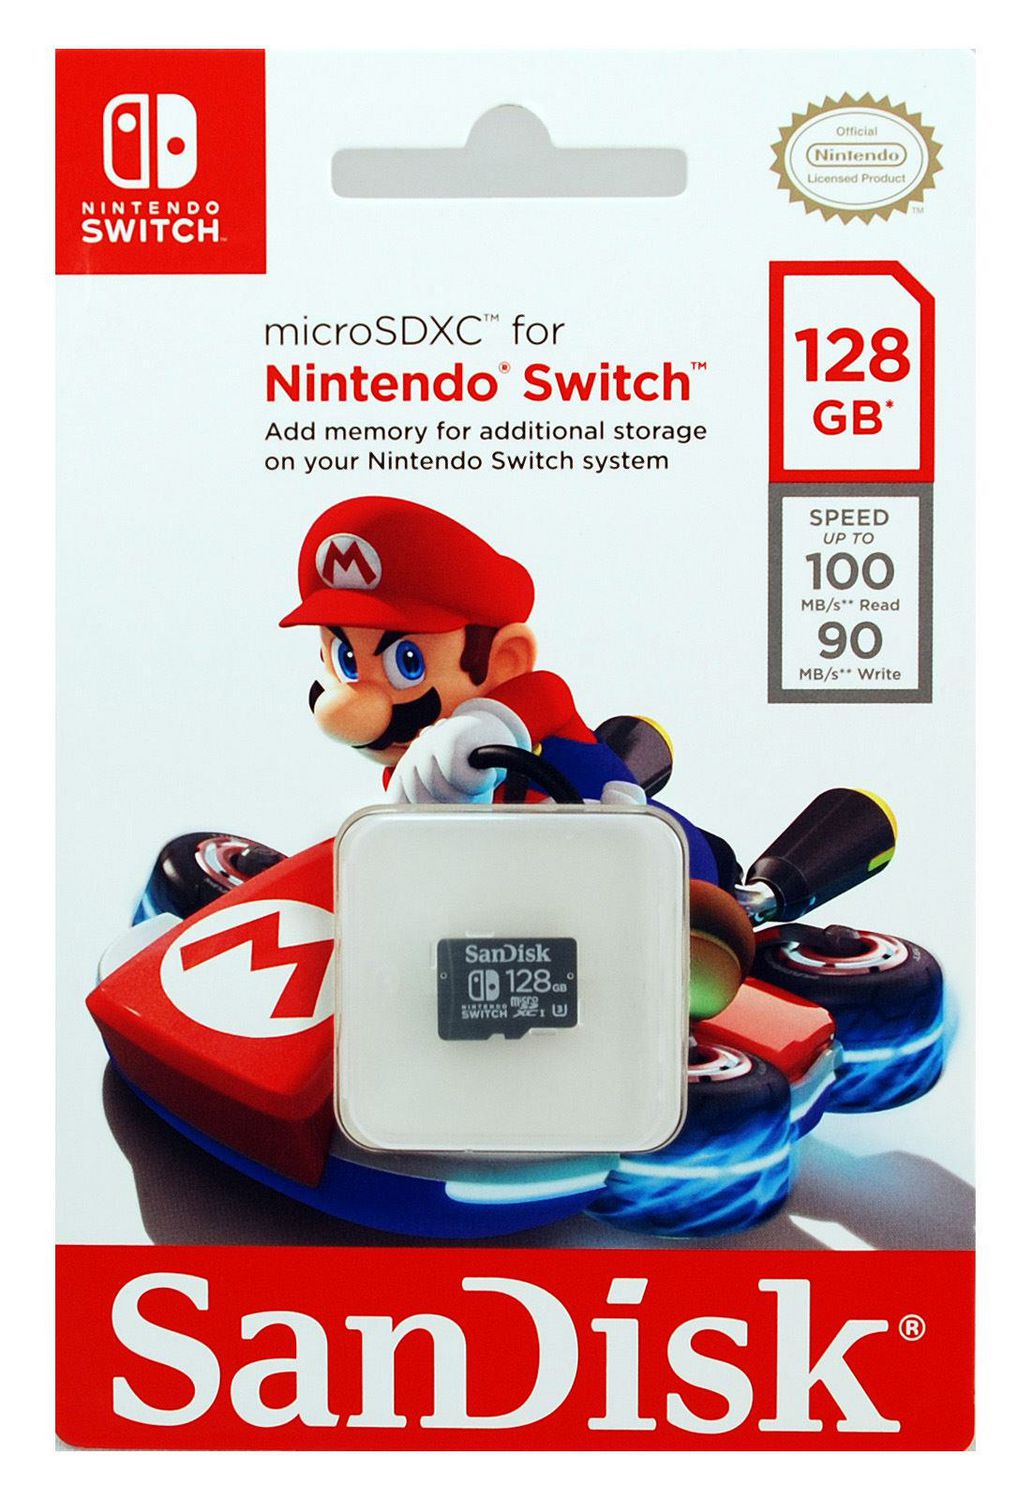 can you use any sandisk for nintendo switch